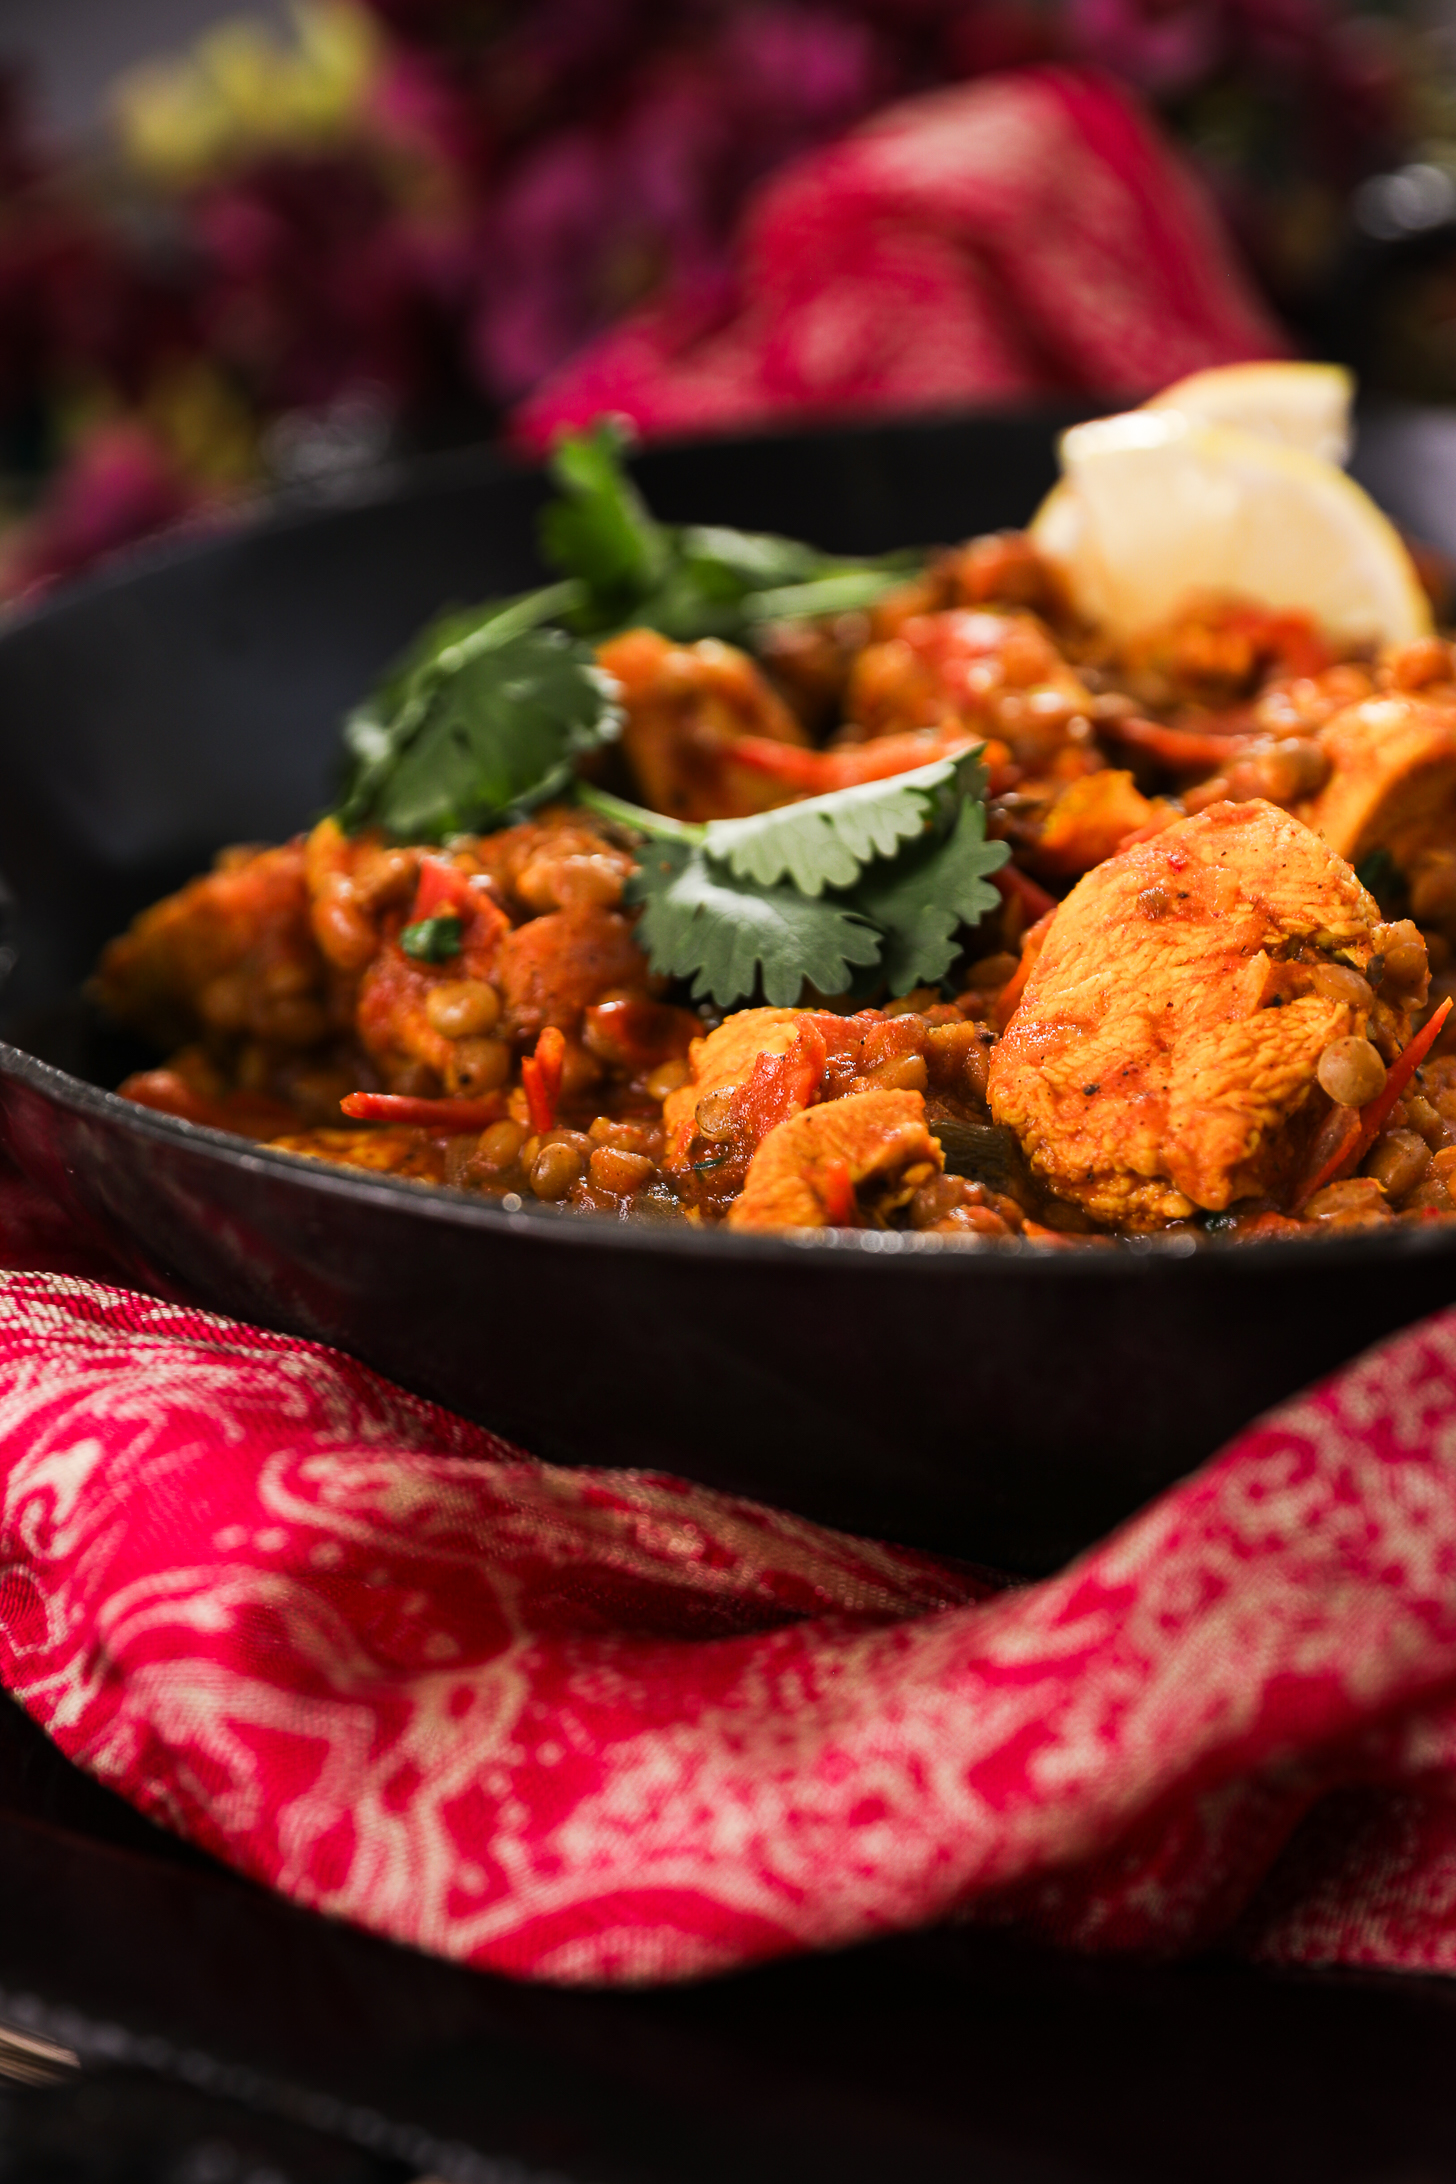 Perspective view of chicken and lentils, garnished with fresh cilantro, lemon slices styled with a pink dupatta scarf.